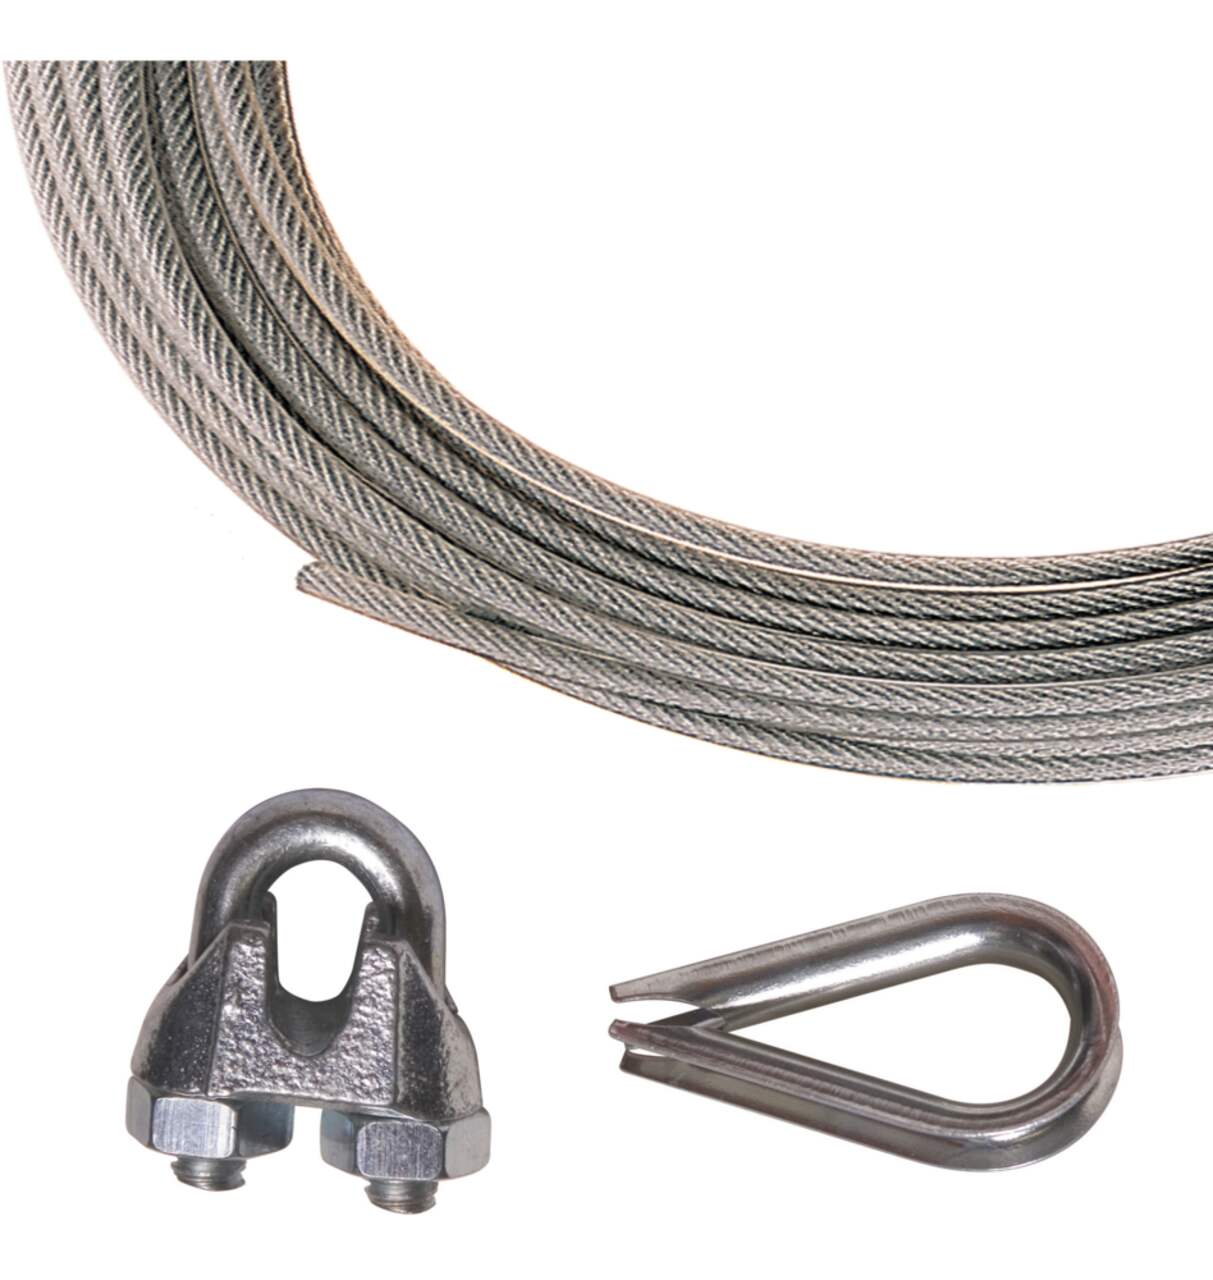 Ben-Mor Galvanized Steel Cable, 50-ft, Assorted Sizes